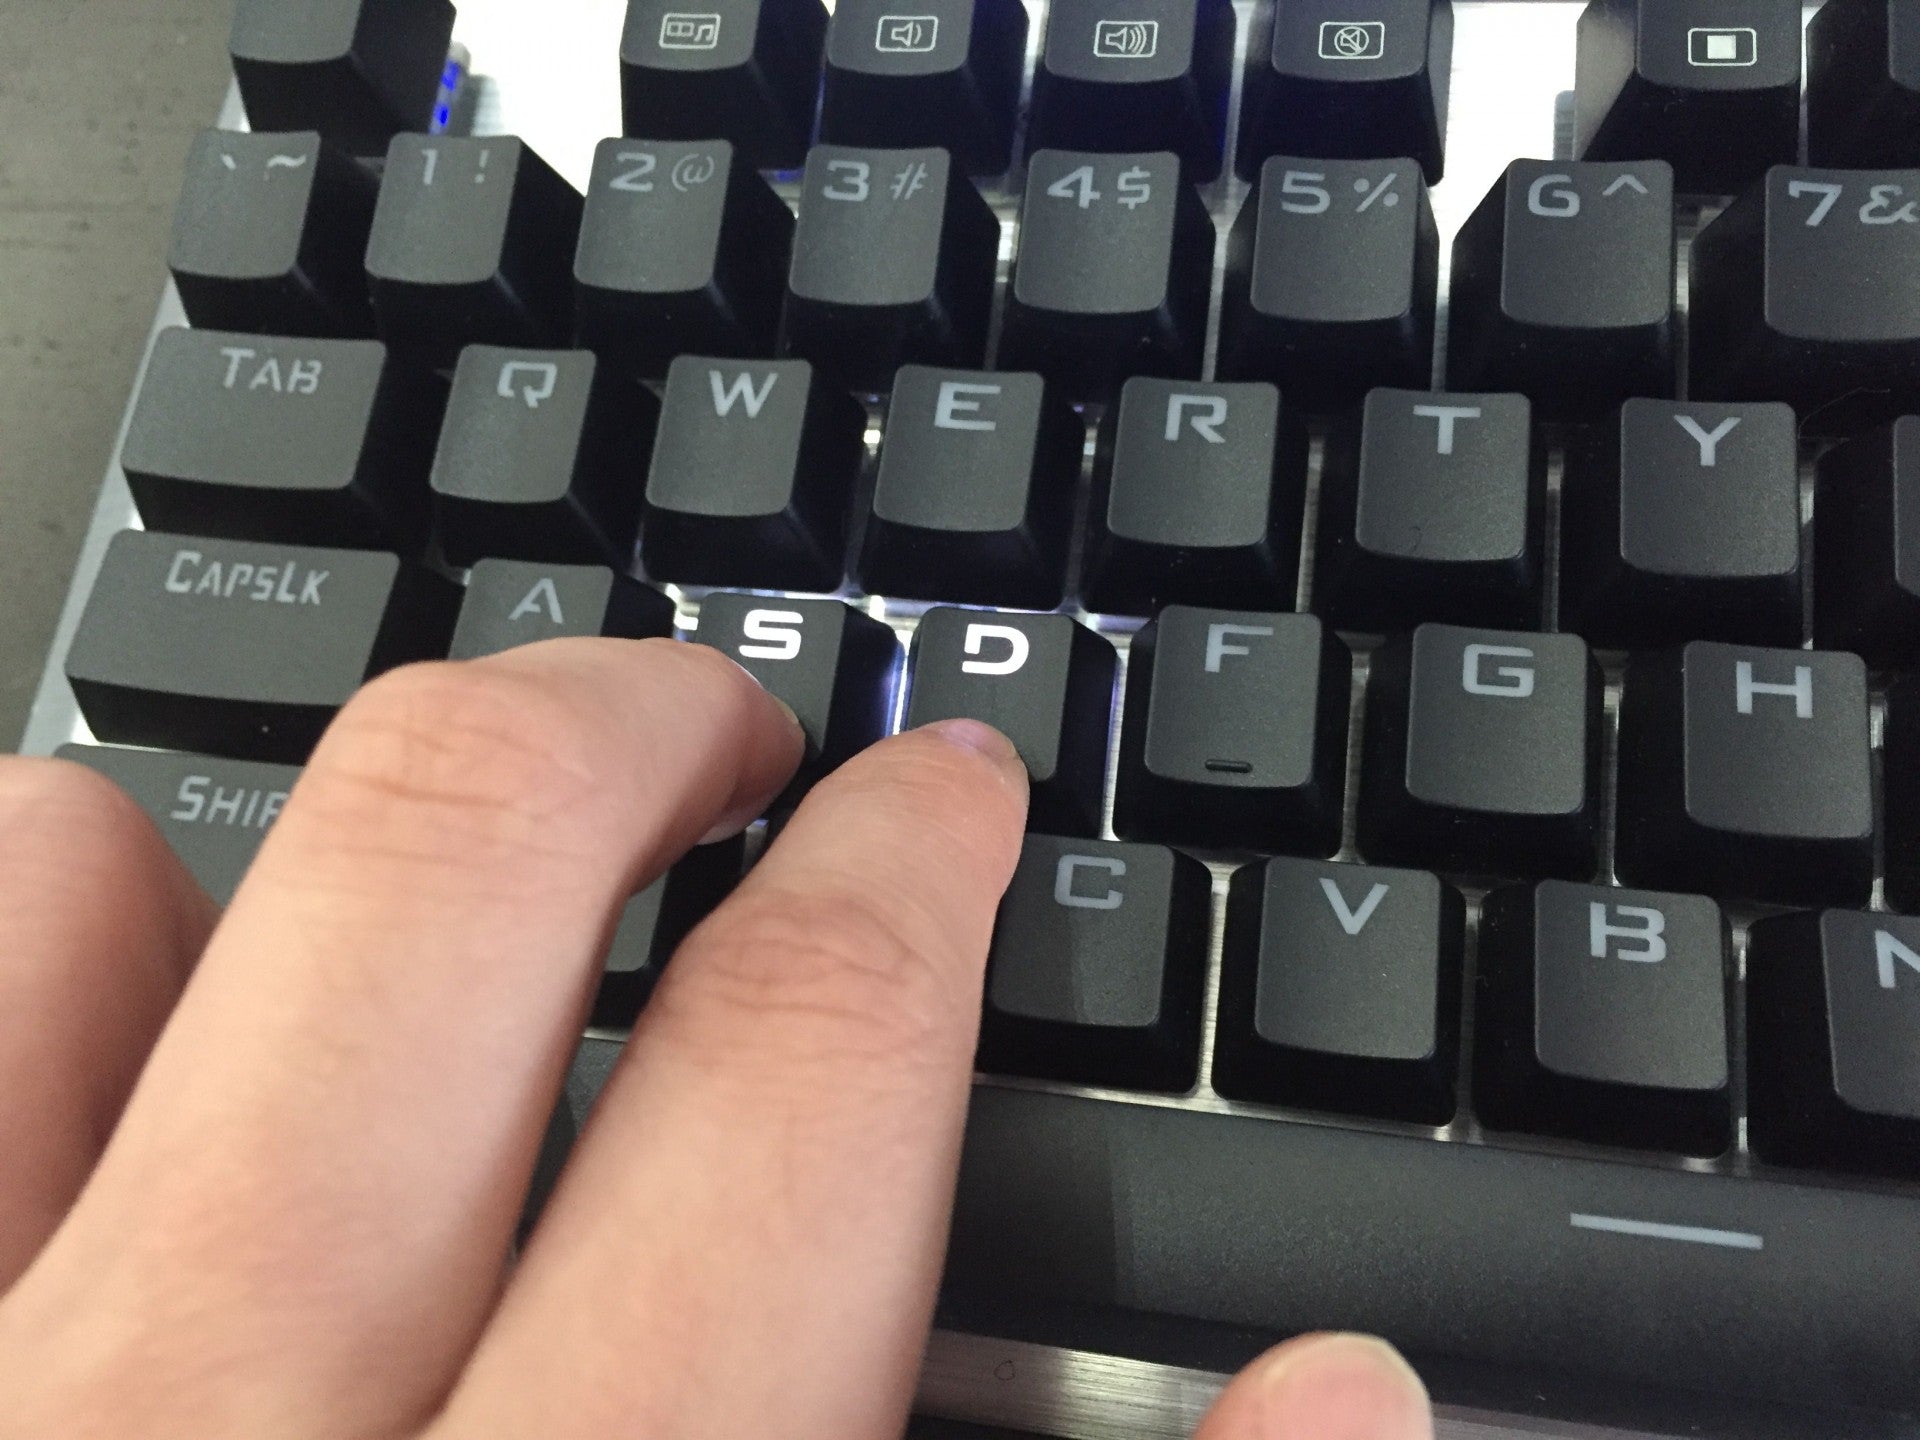 Light up as you type (FN+End).